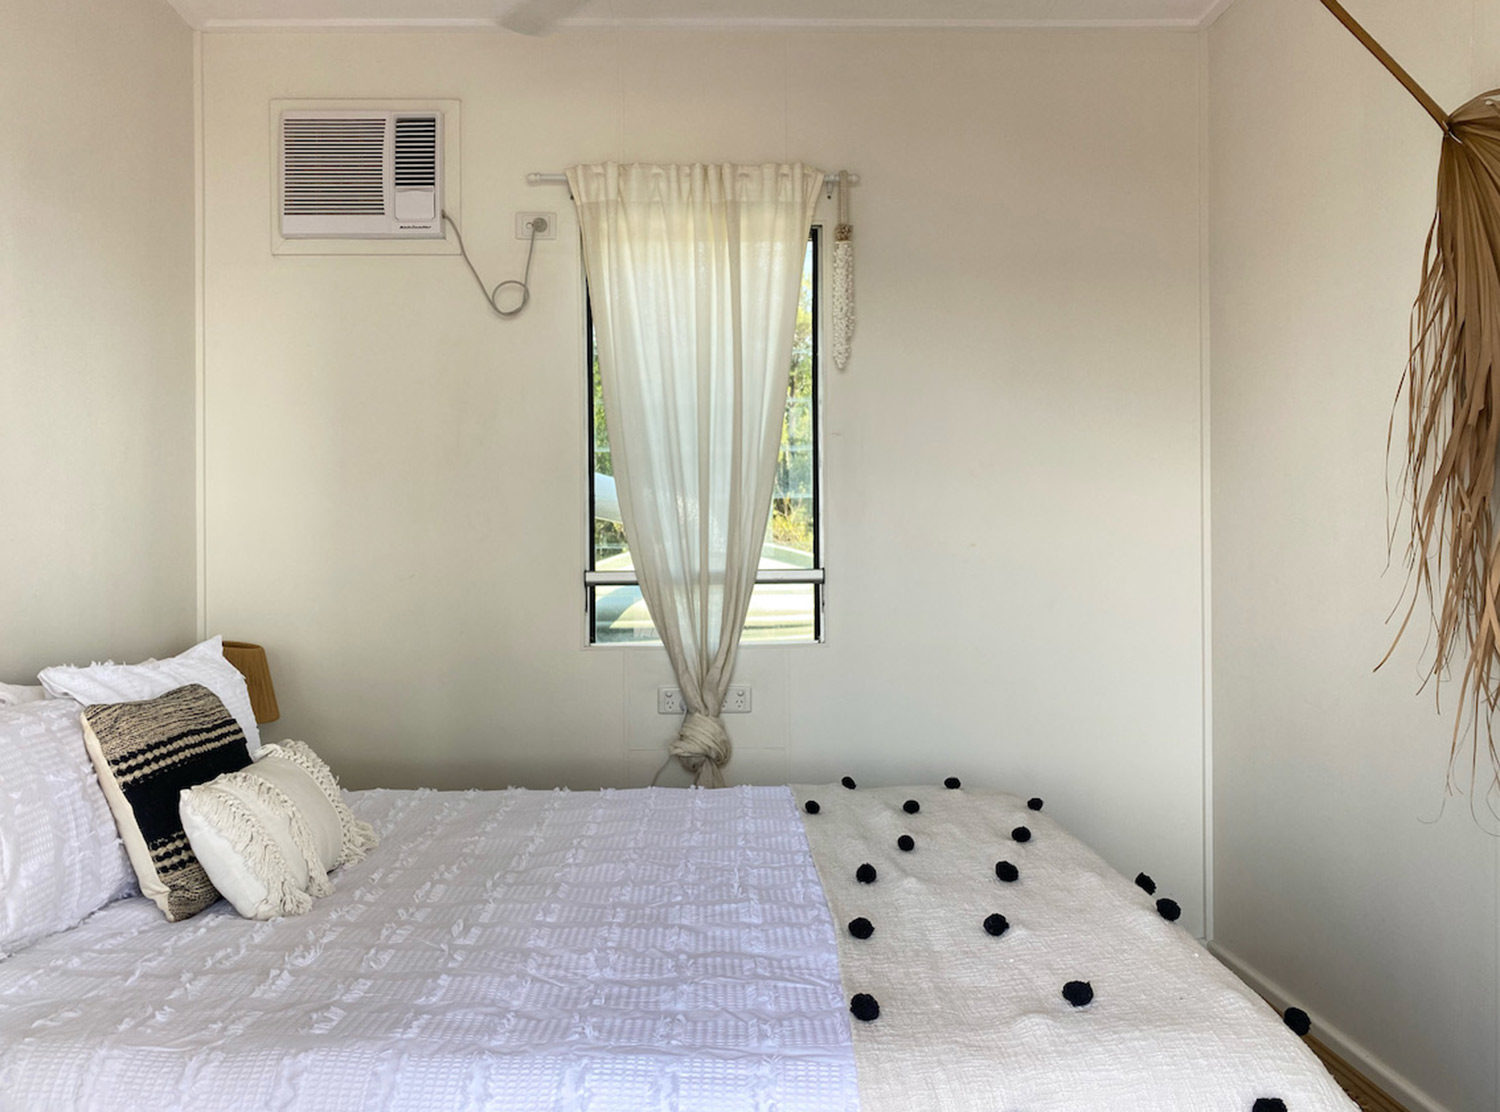 Tiwi Island Retreat The bedrooms are cozy and simple but are freshly renovated, sparkling clean and super comfortable